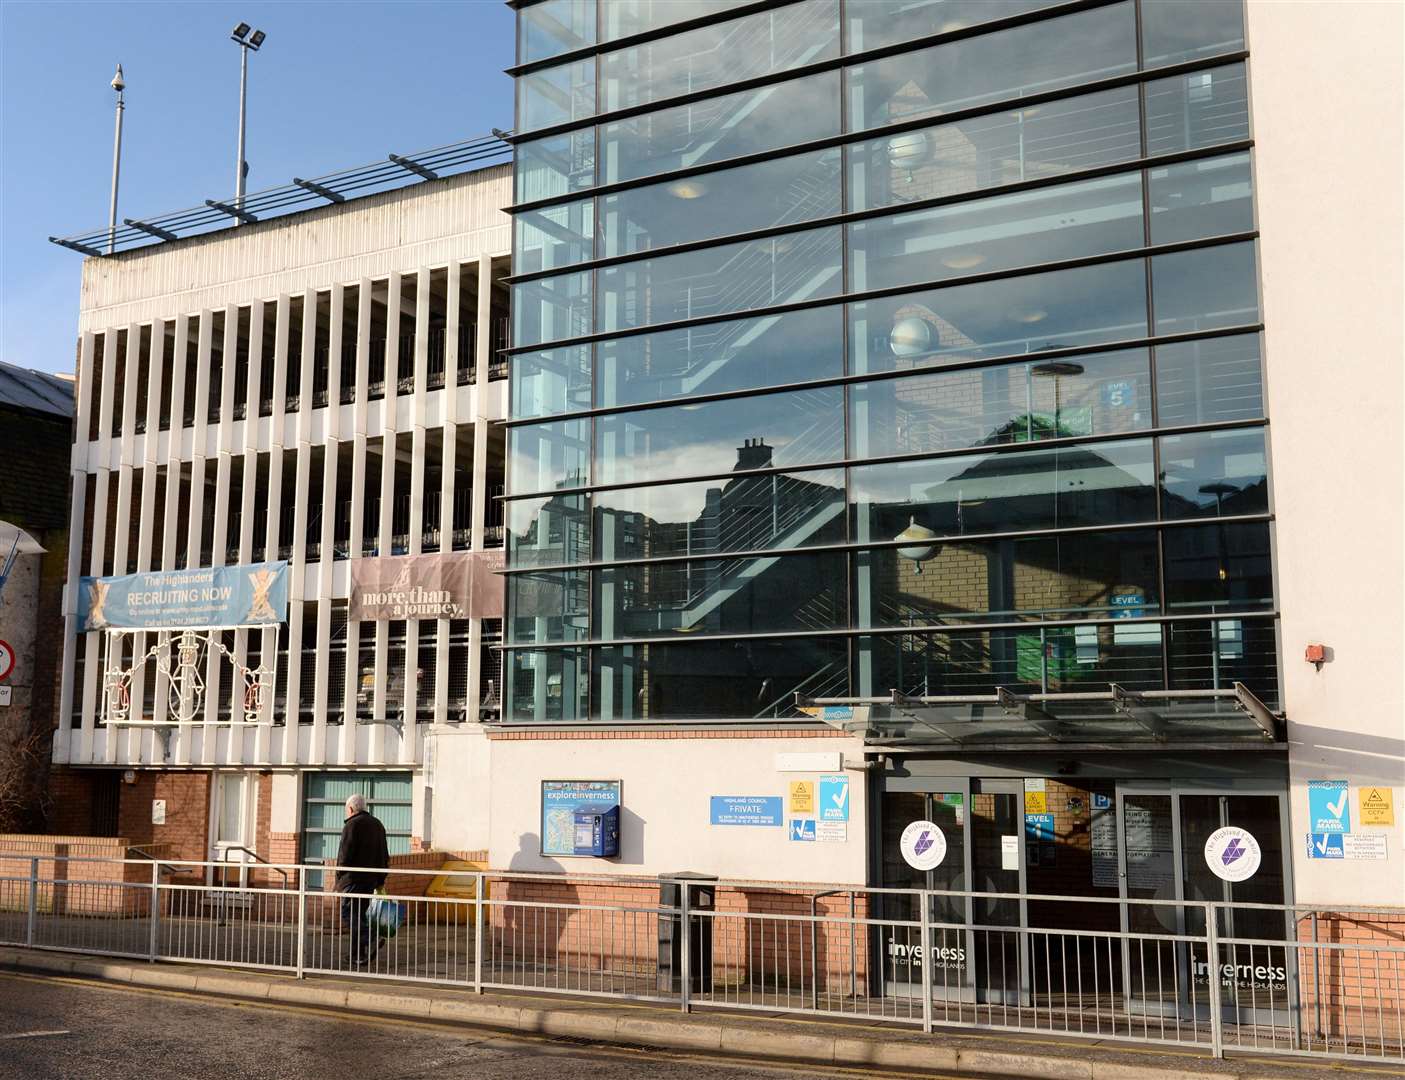 A new active travel hub is planned for the Rose Street Car park.